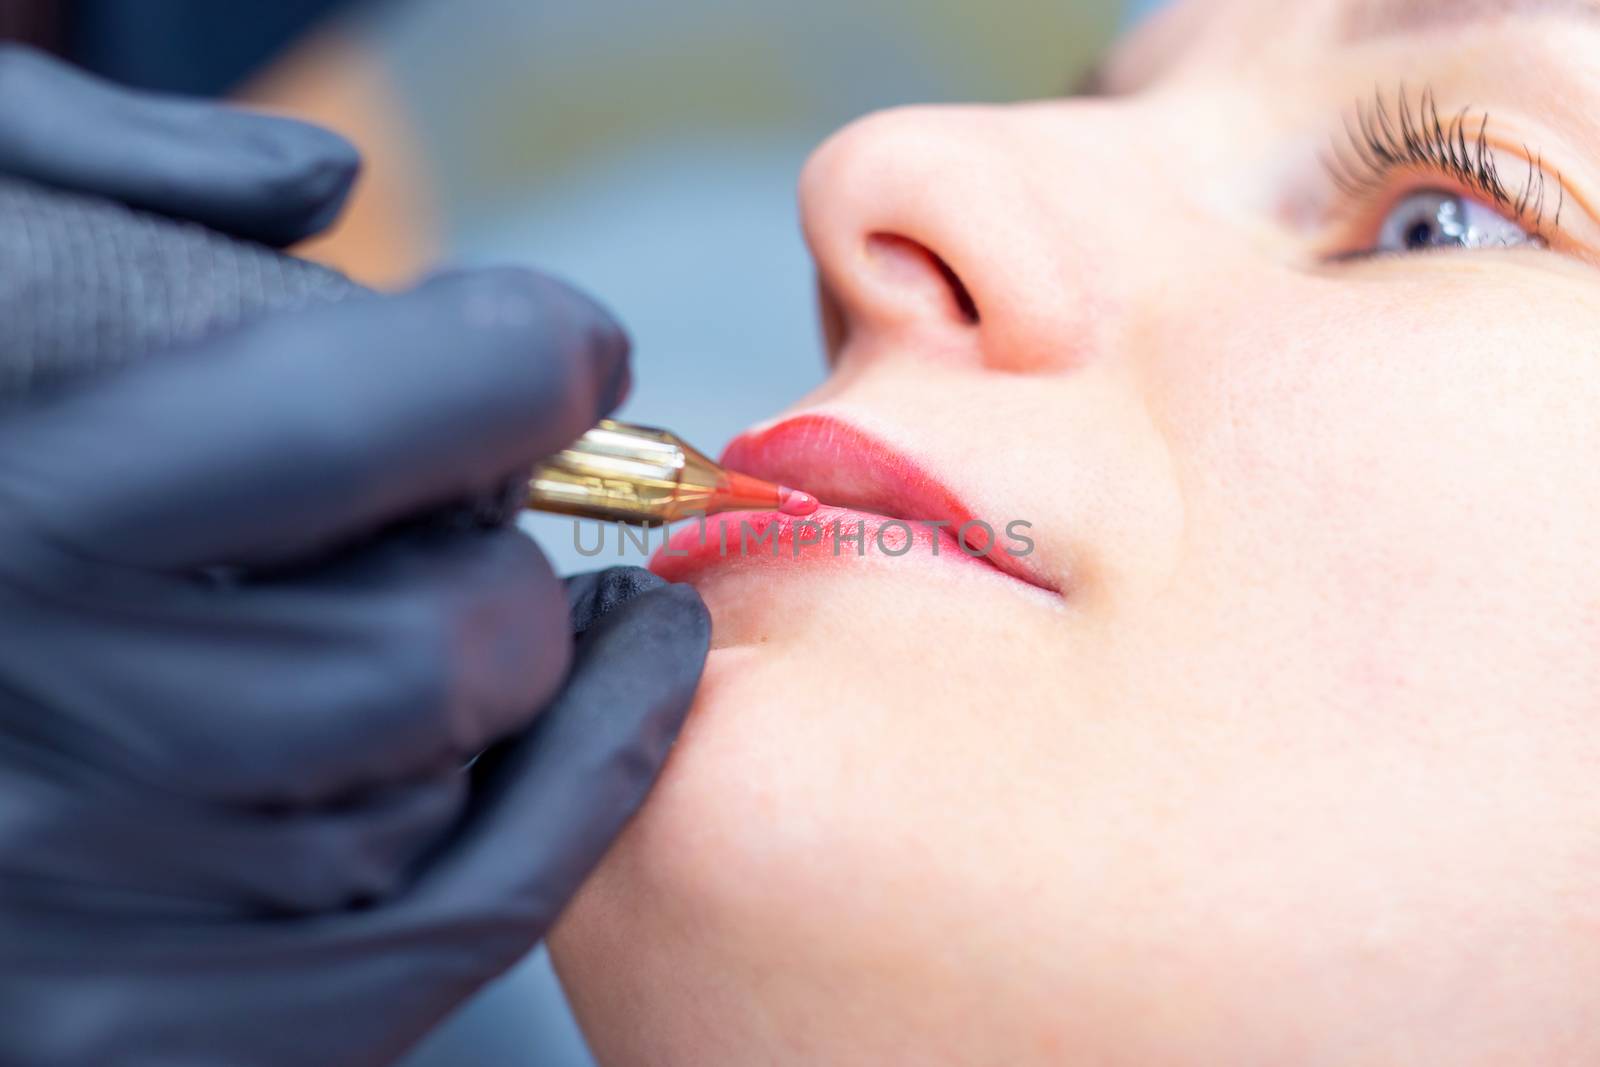 The process of applying permanent makeup on the lips with a tattoo machine close-up. Permanent apparatus needle